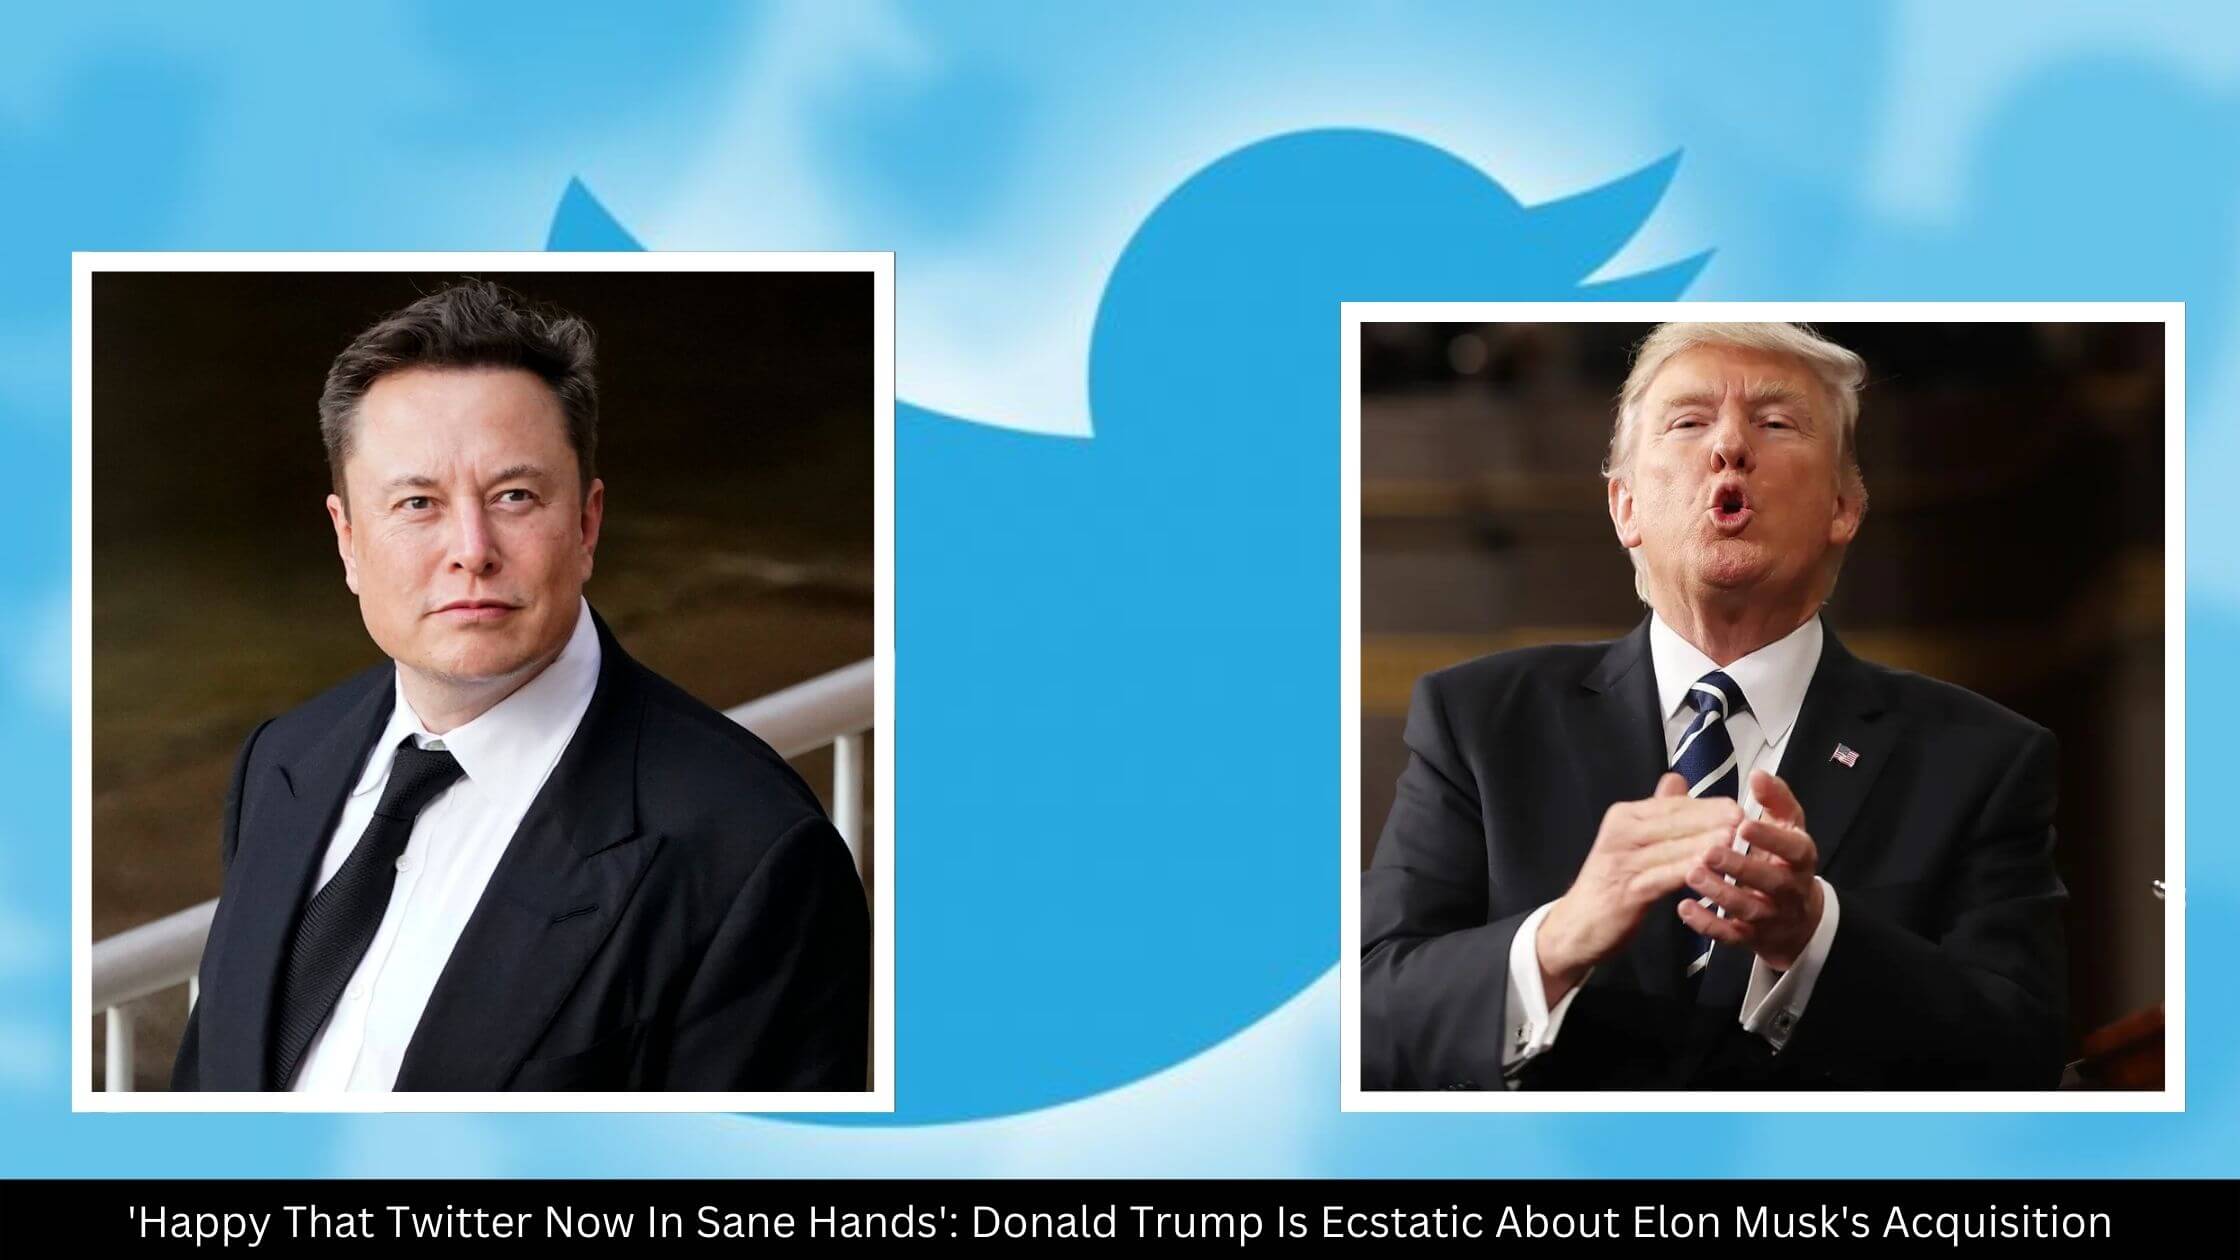 ‘Happy That Twitter Now In Sane Hands’: Donald Trump Is Ecstatic About Elon Musk’s Acquisition